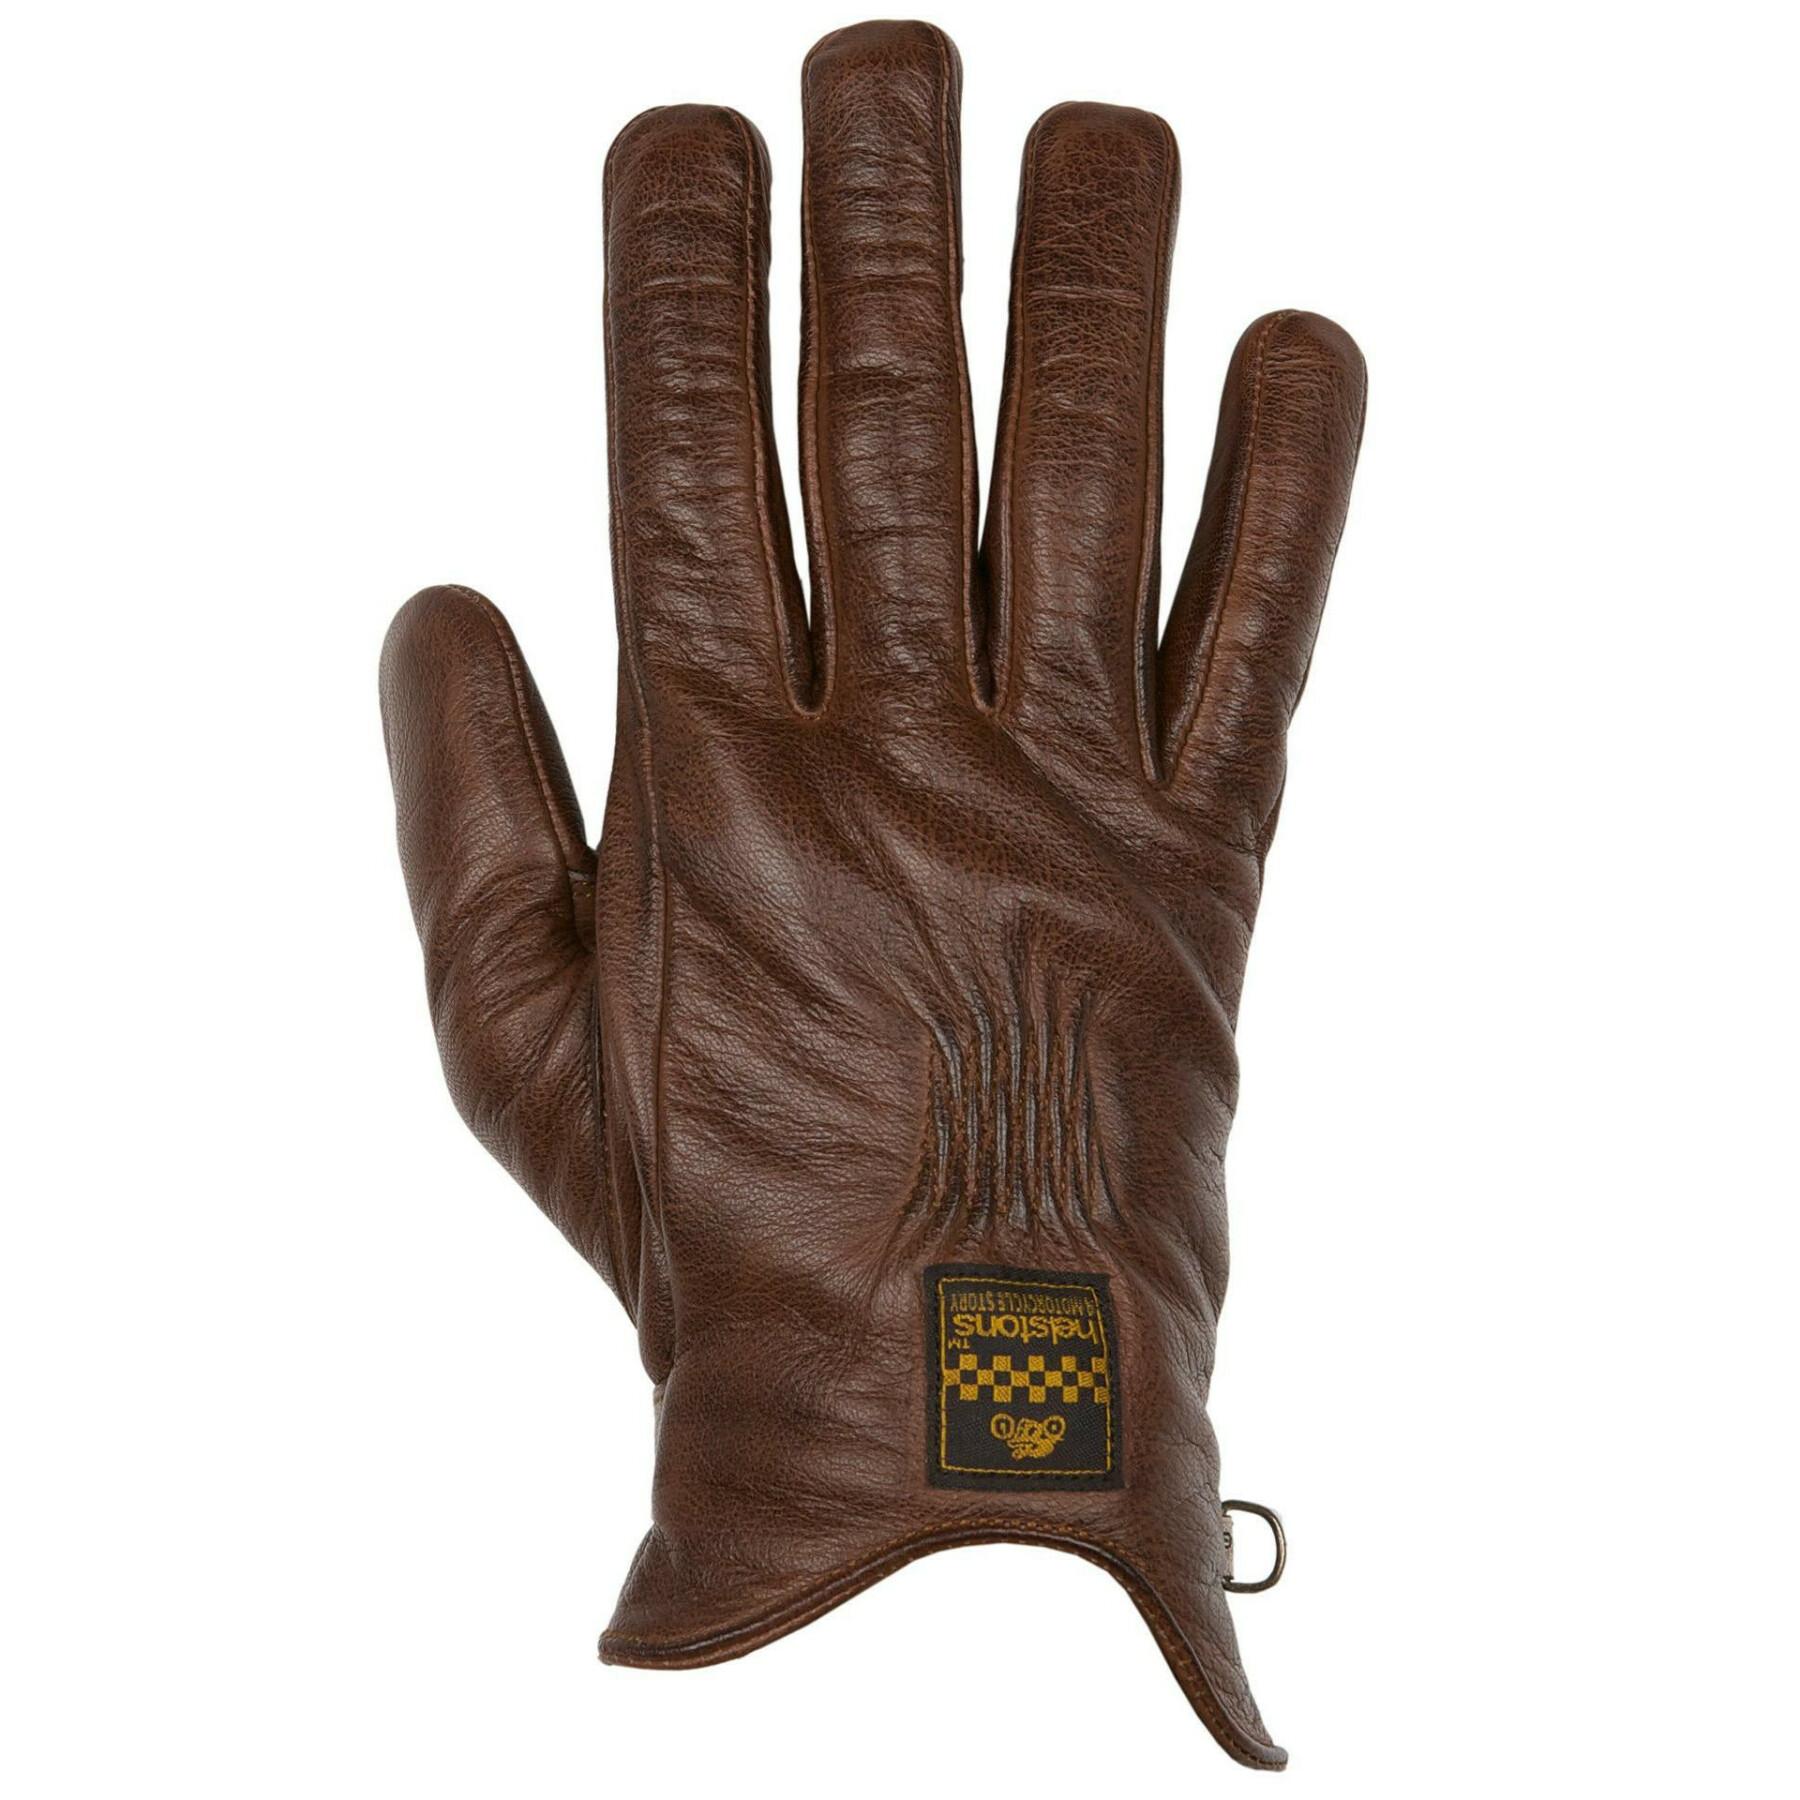 Summer leather gloves Helstons condor